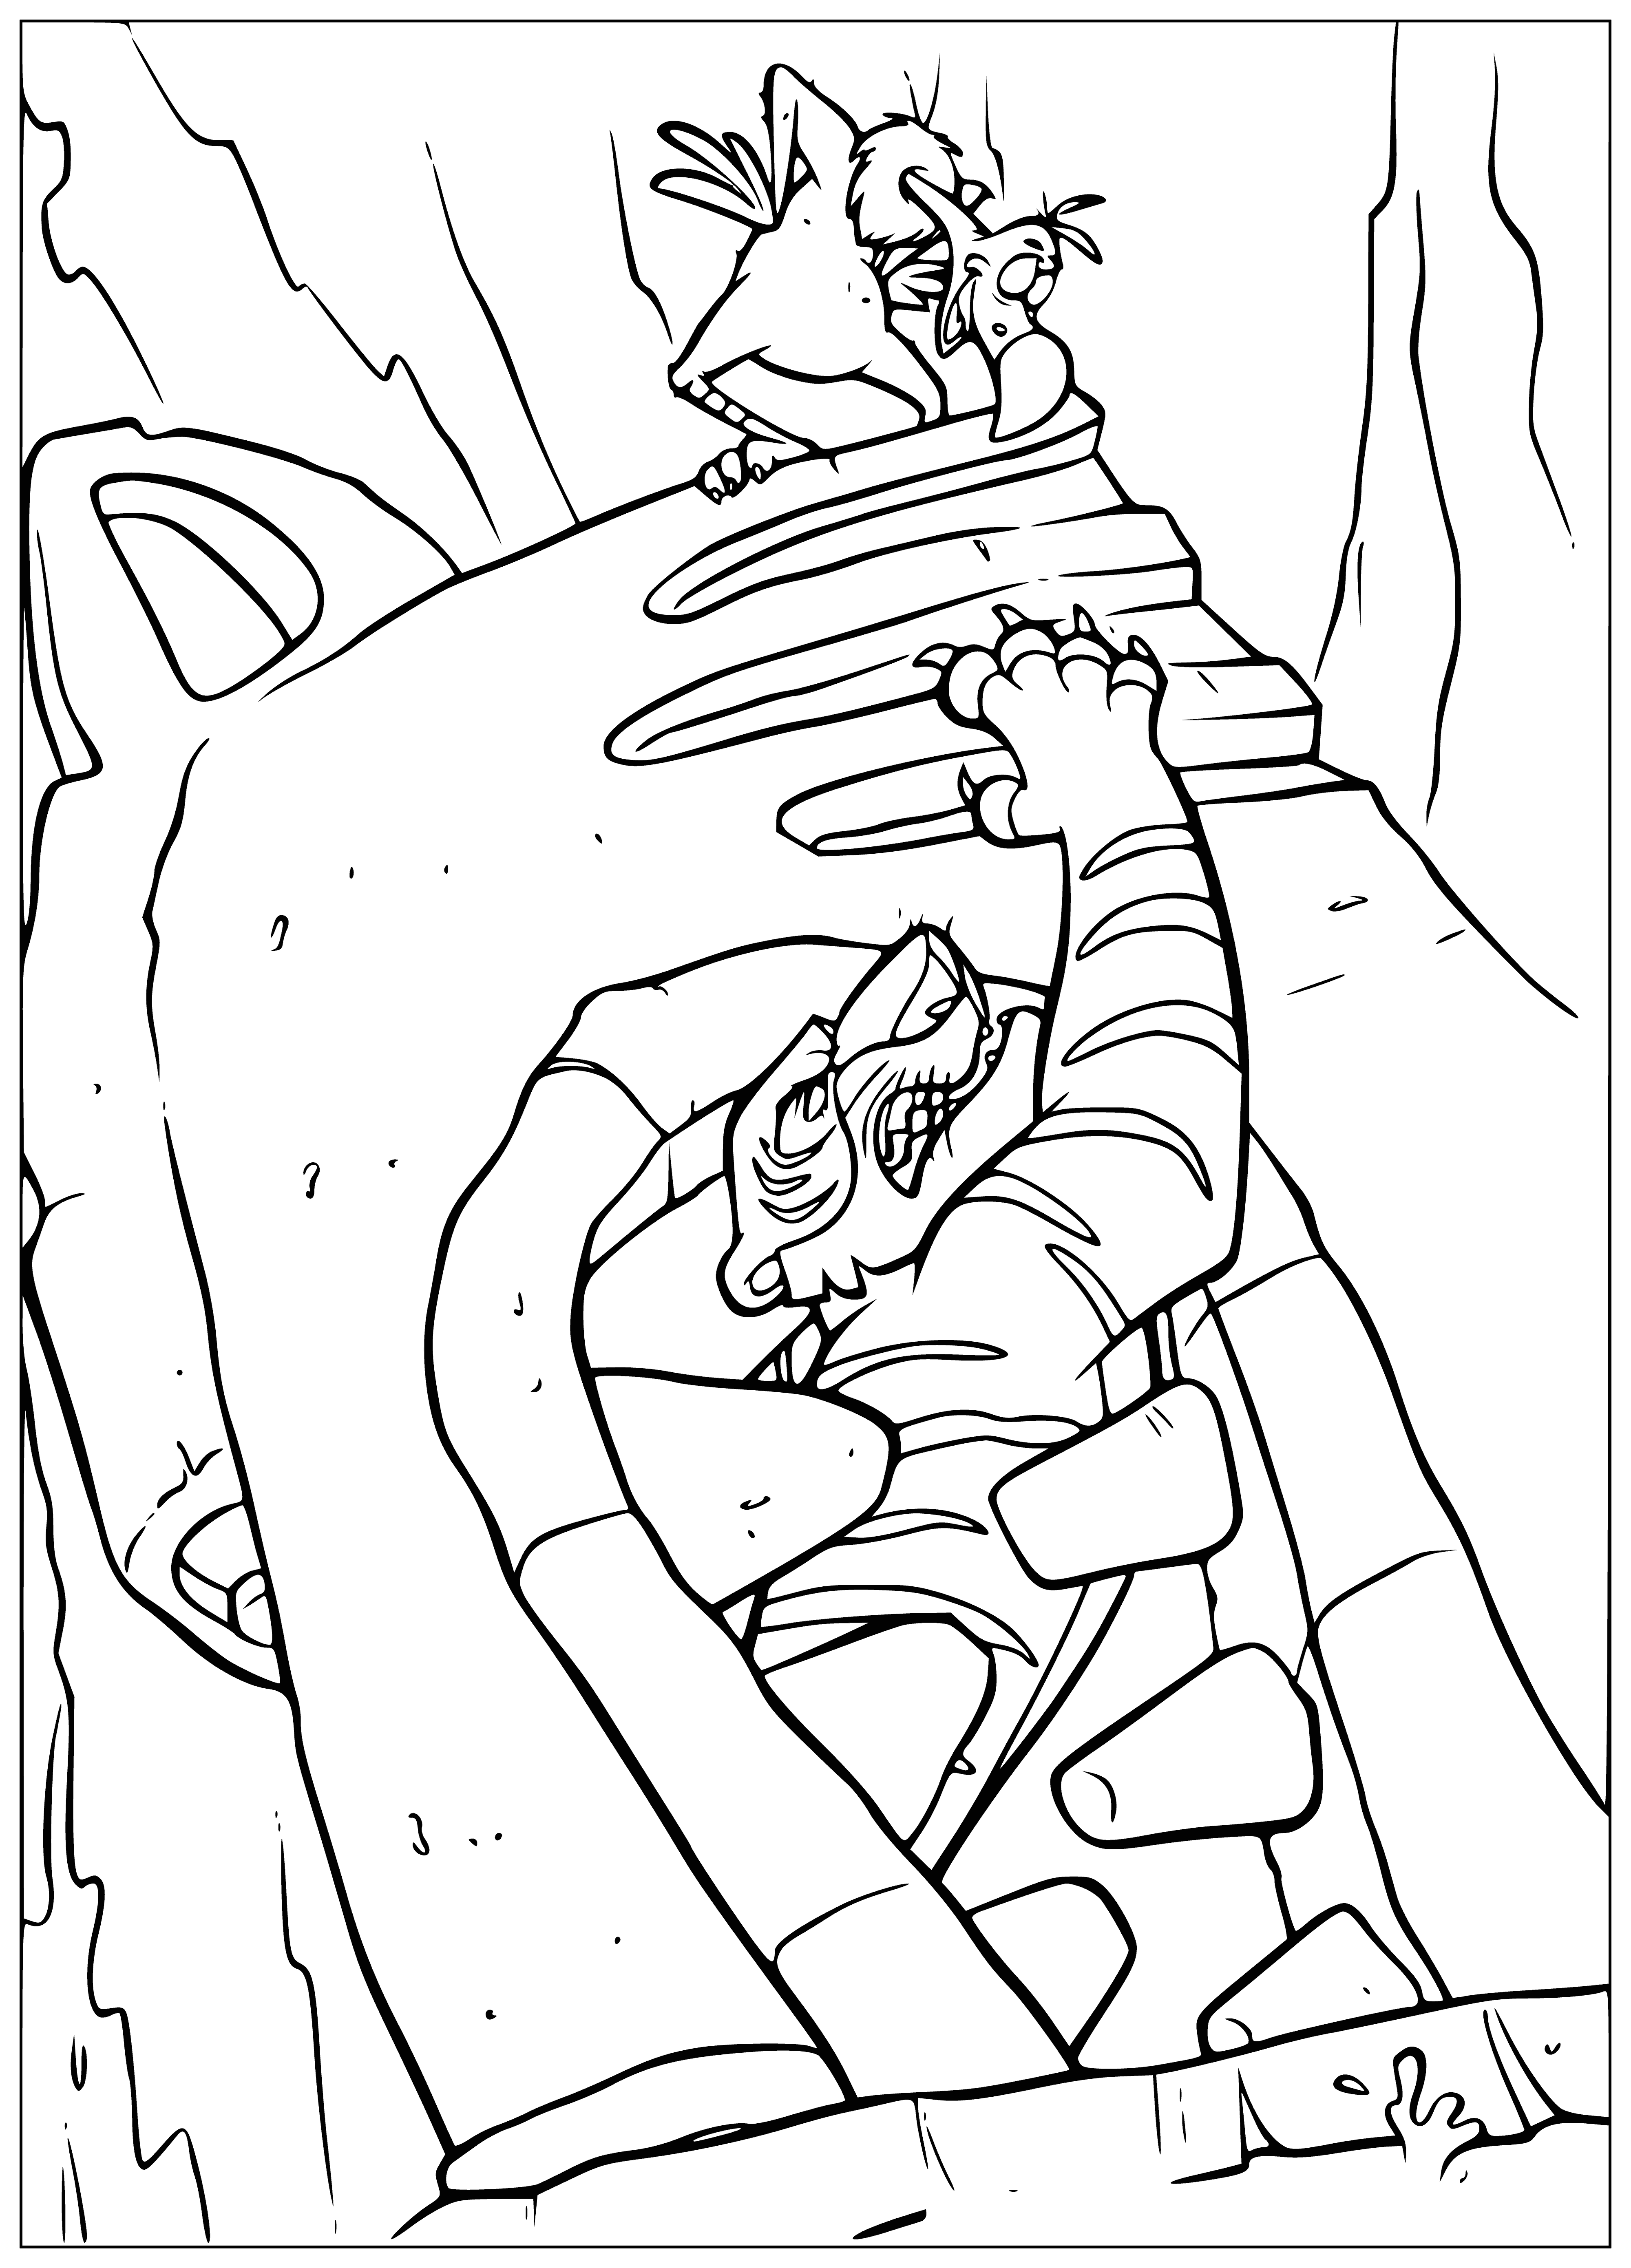 Griffin and Cher Hahn coloring page